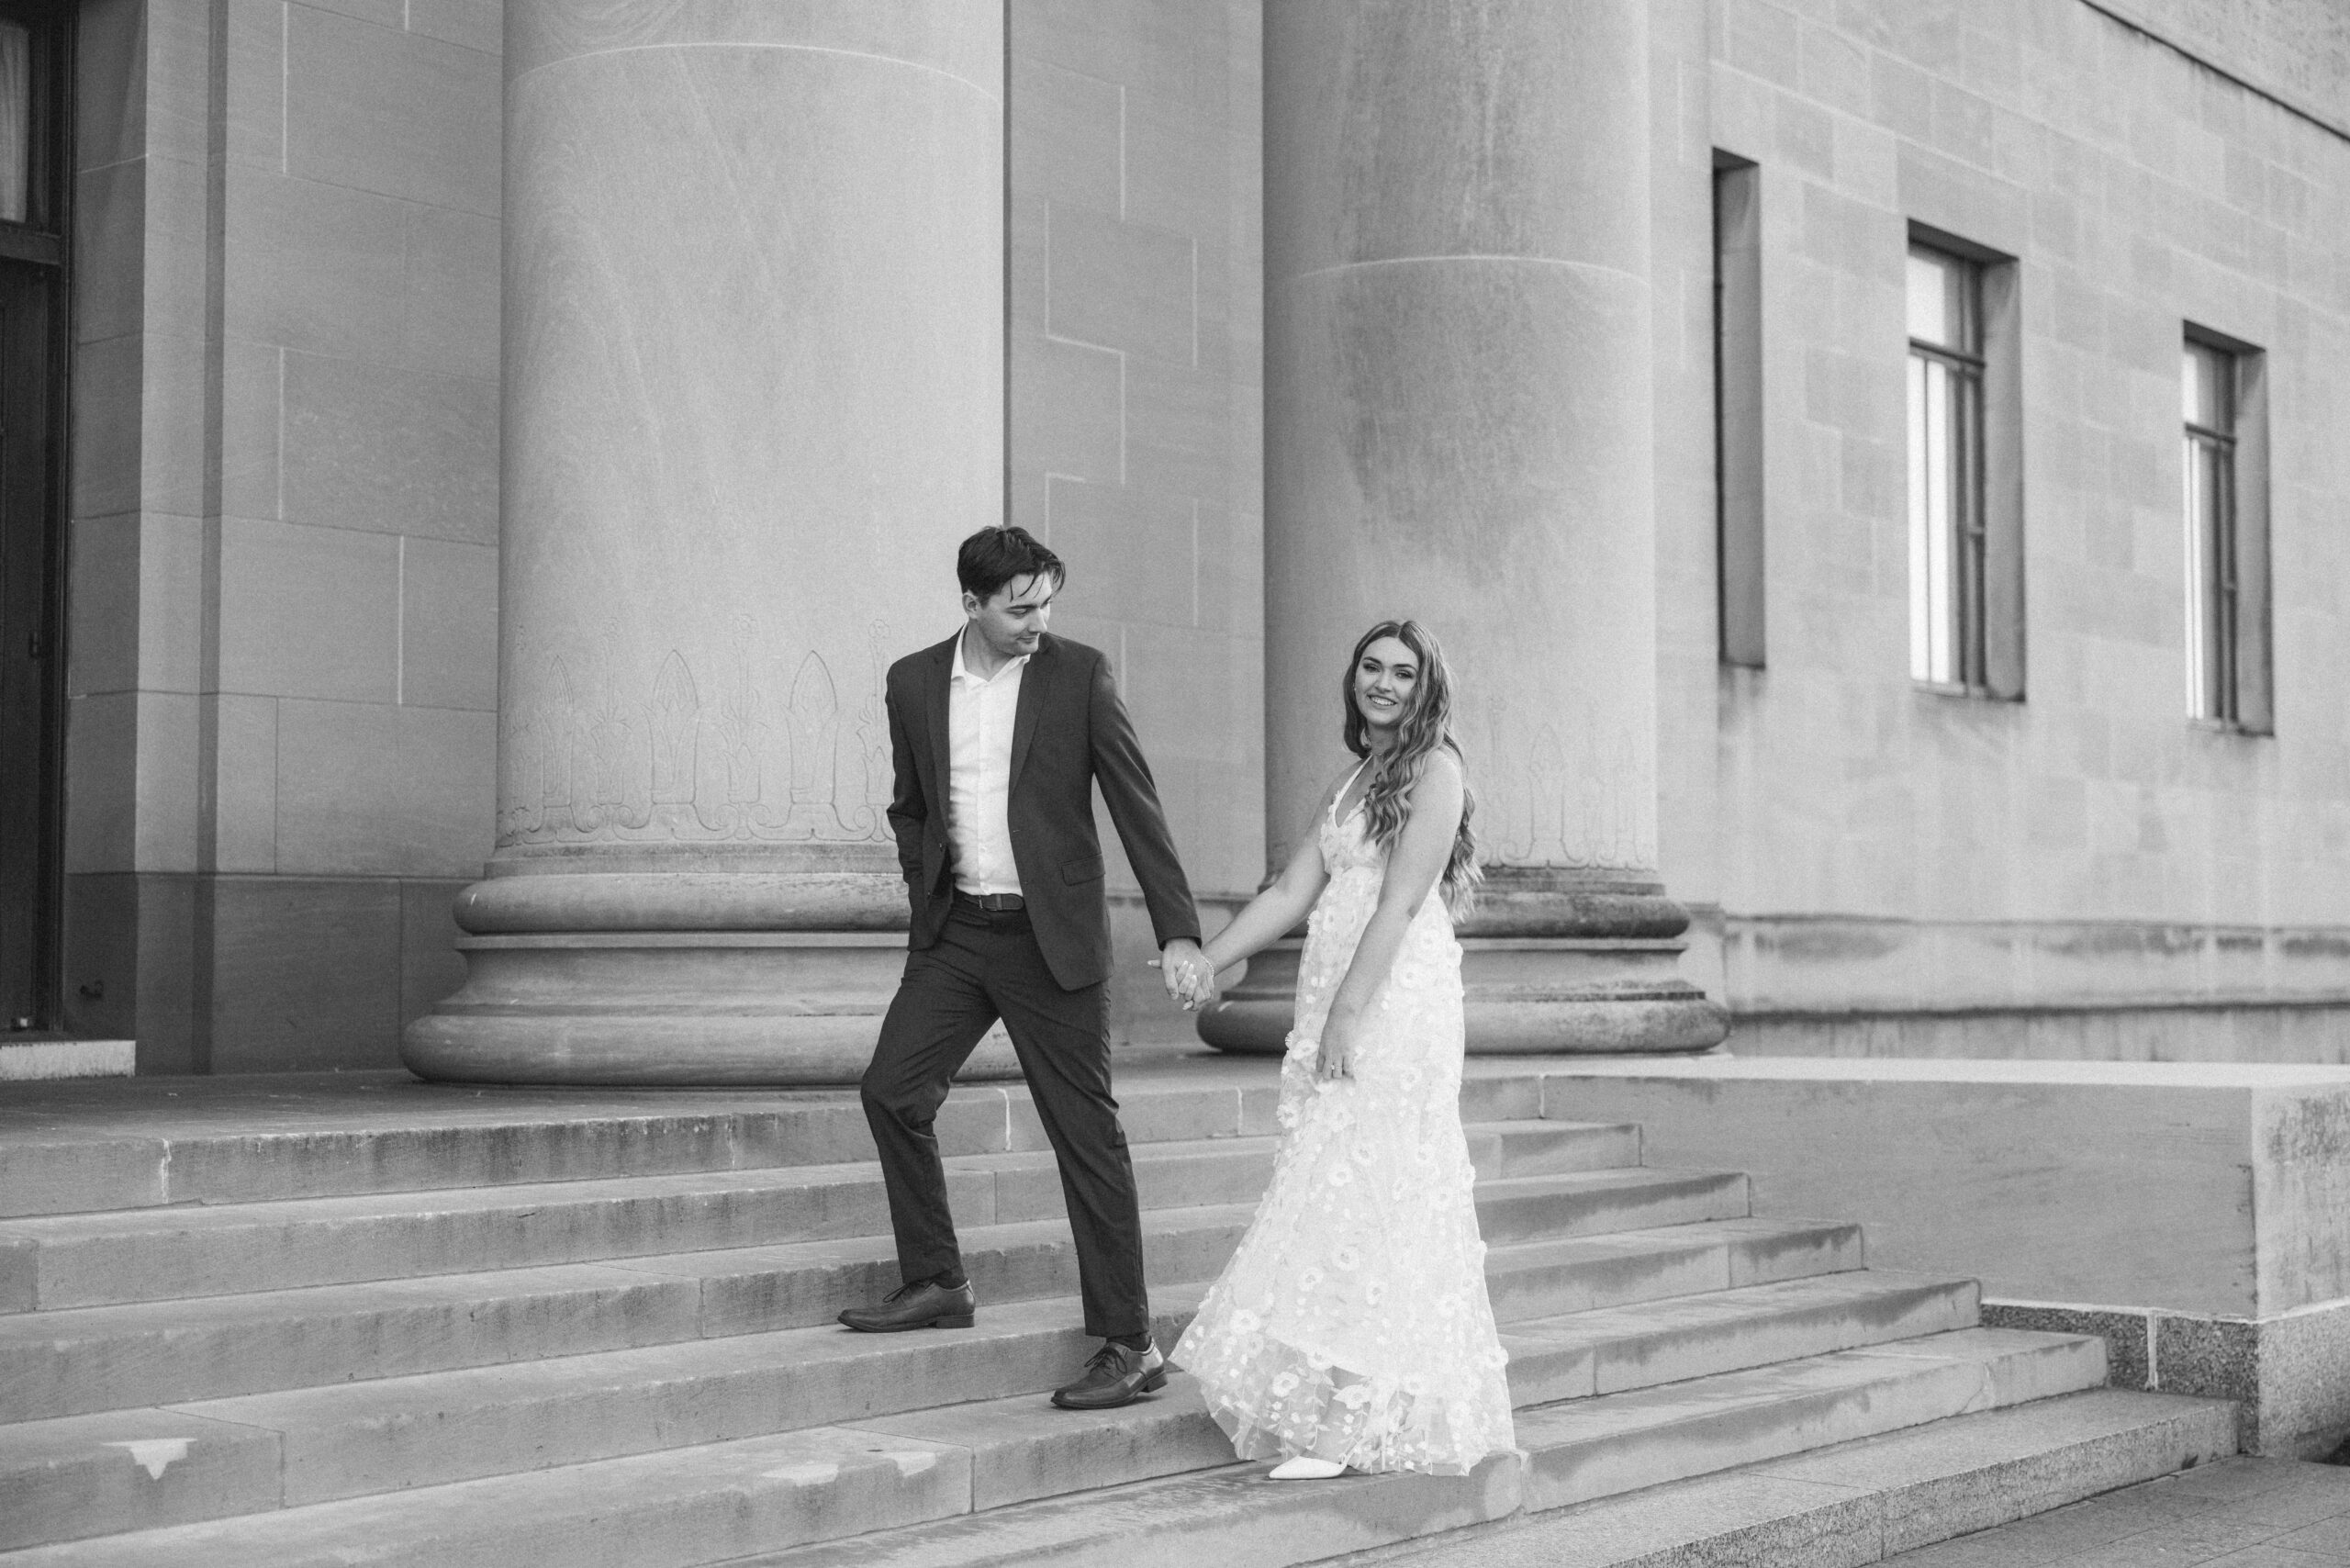 Black and white engagement session in Kansas City, Missouri by Tatyana Zadorin Photography